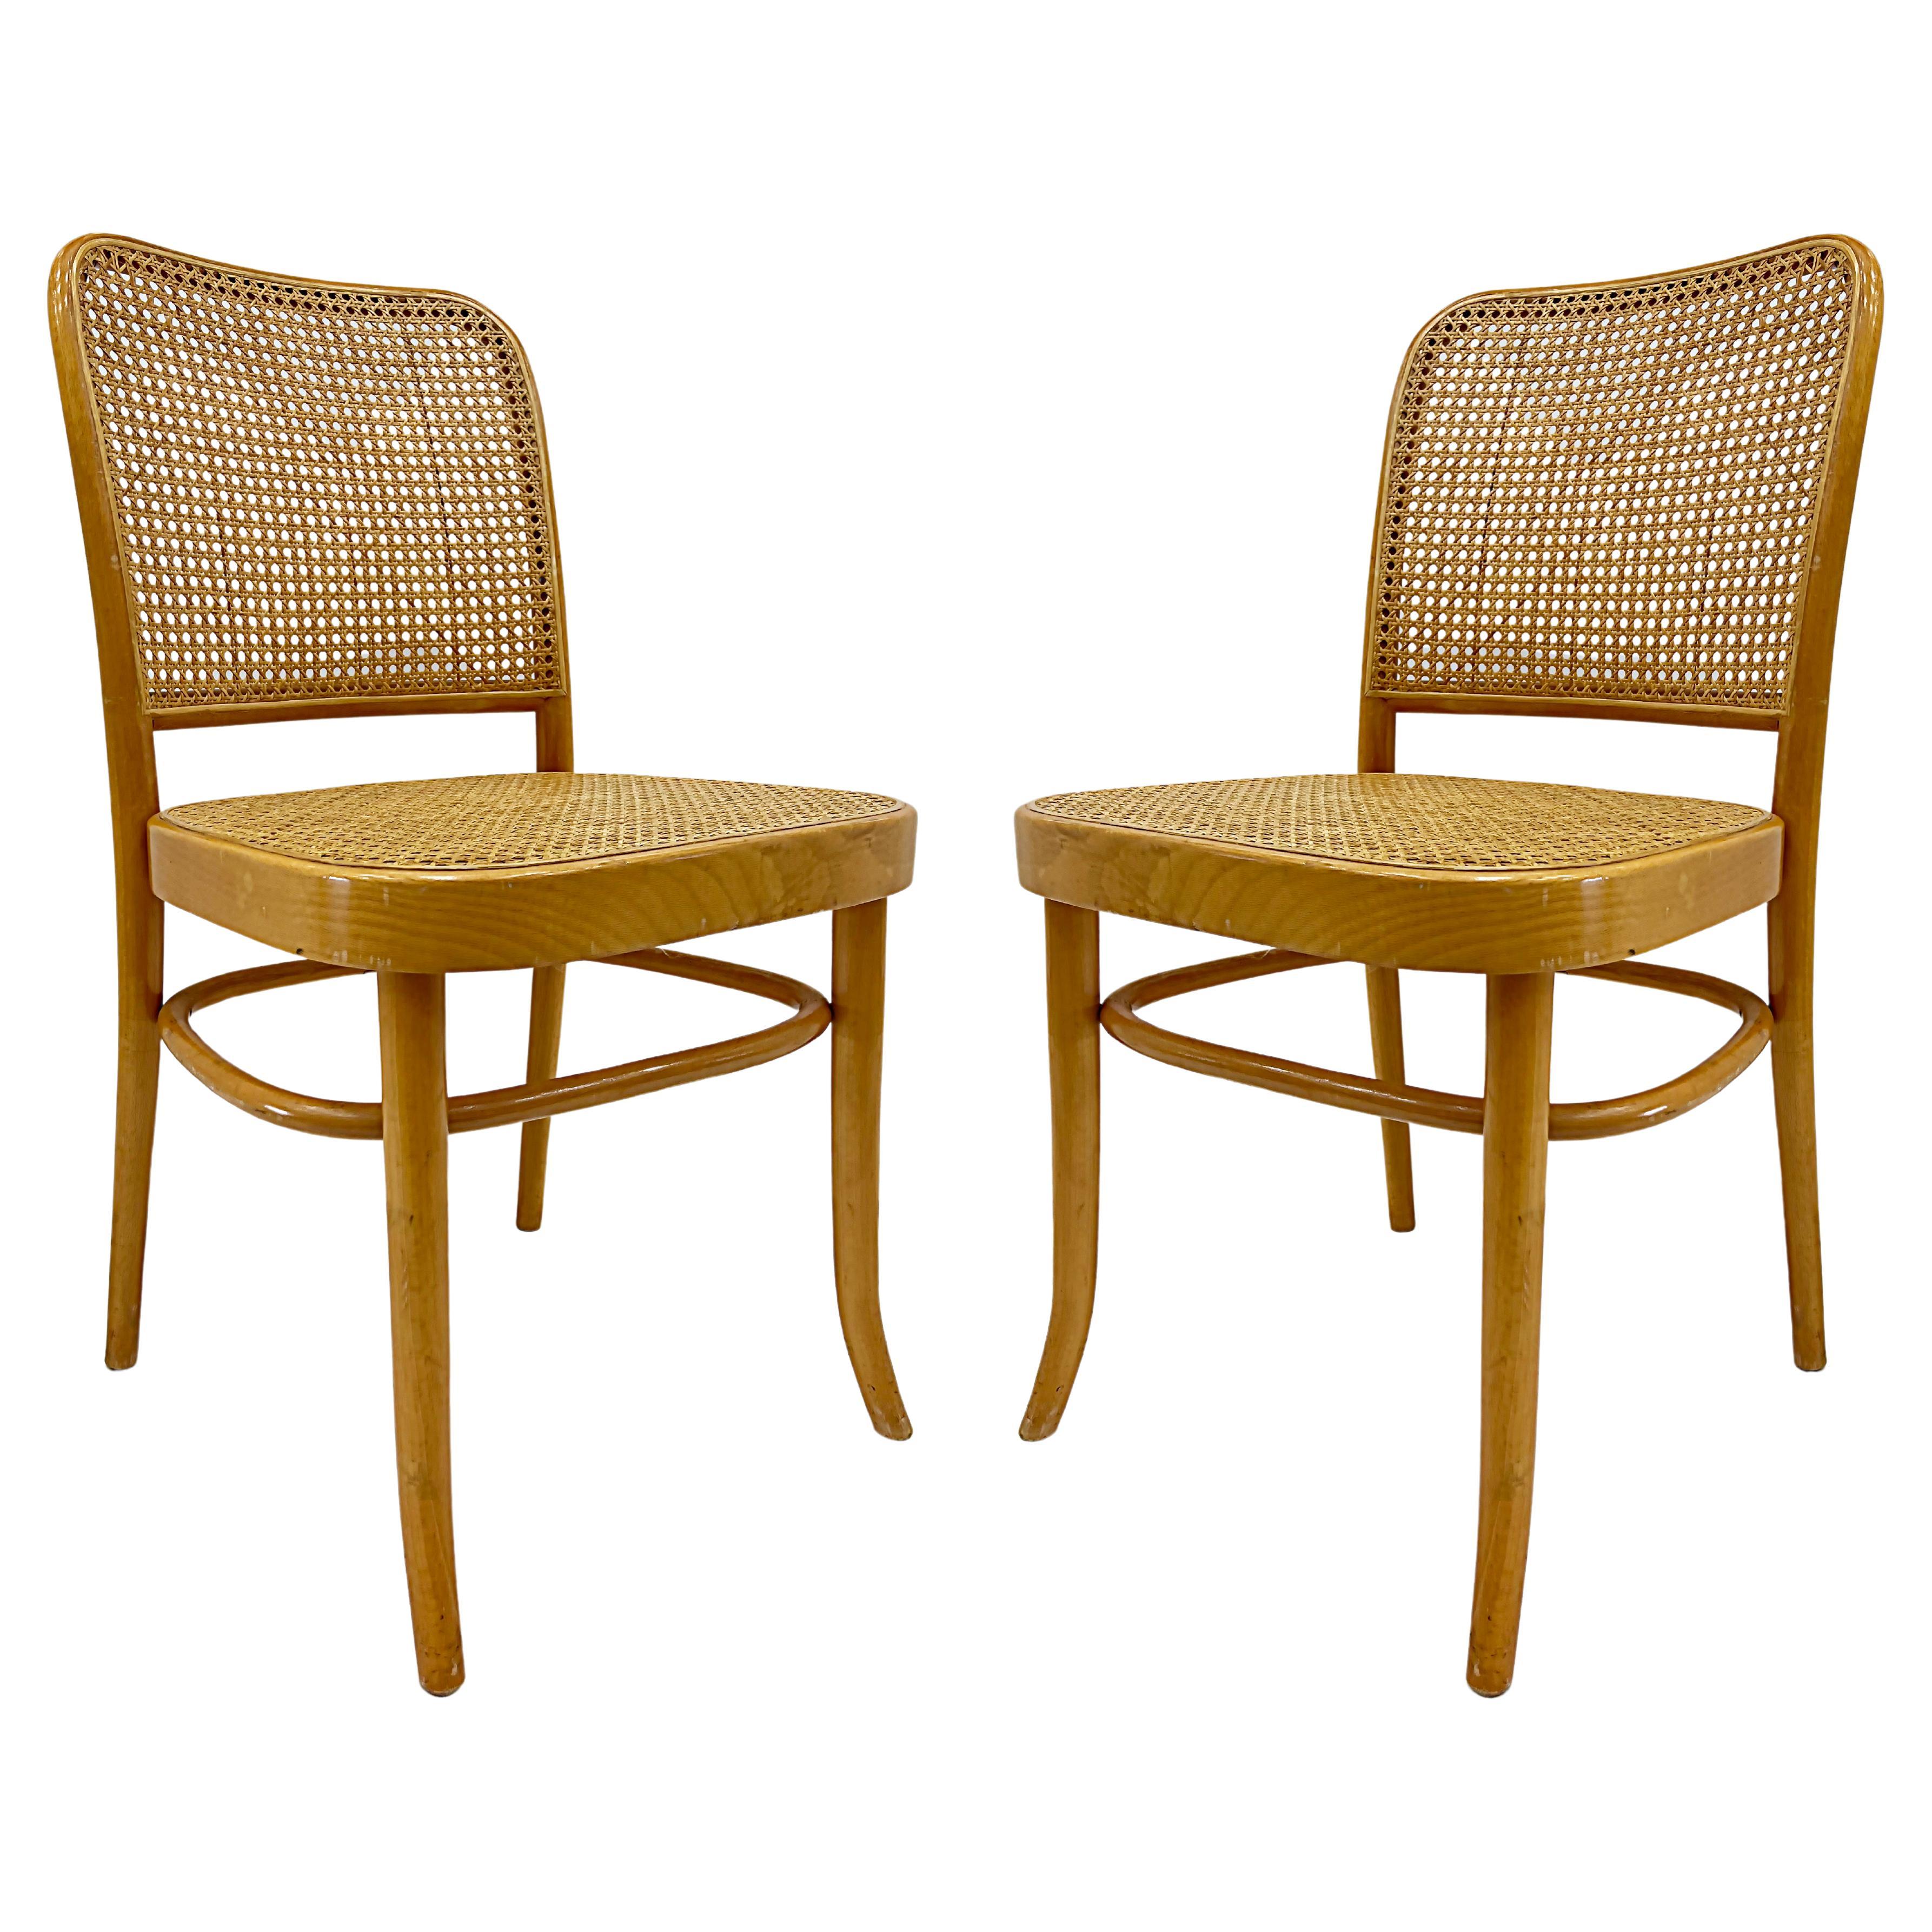 Salvatore Leone Vintage Bentwood Caned Chairs, Thonet Style For Sale